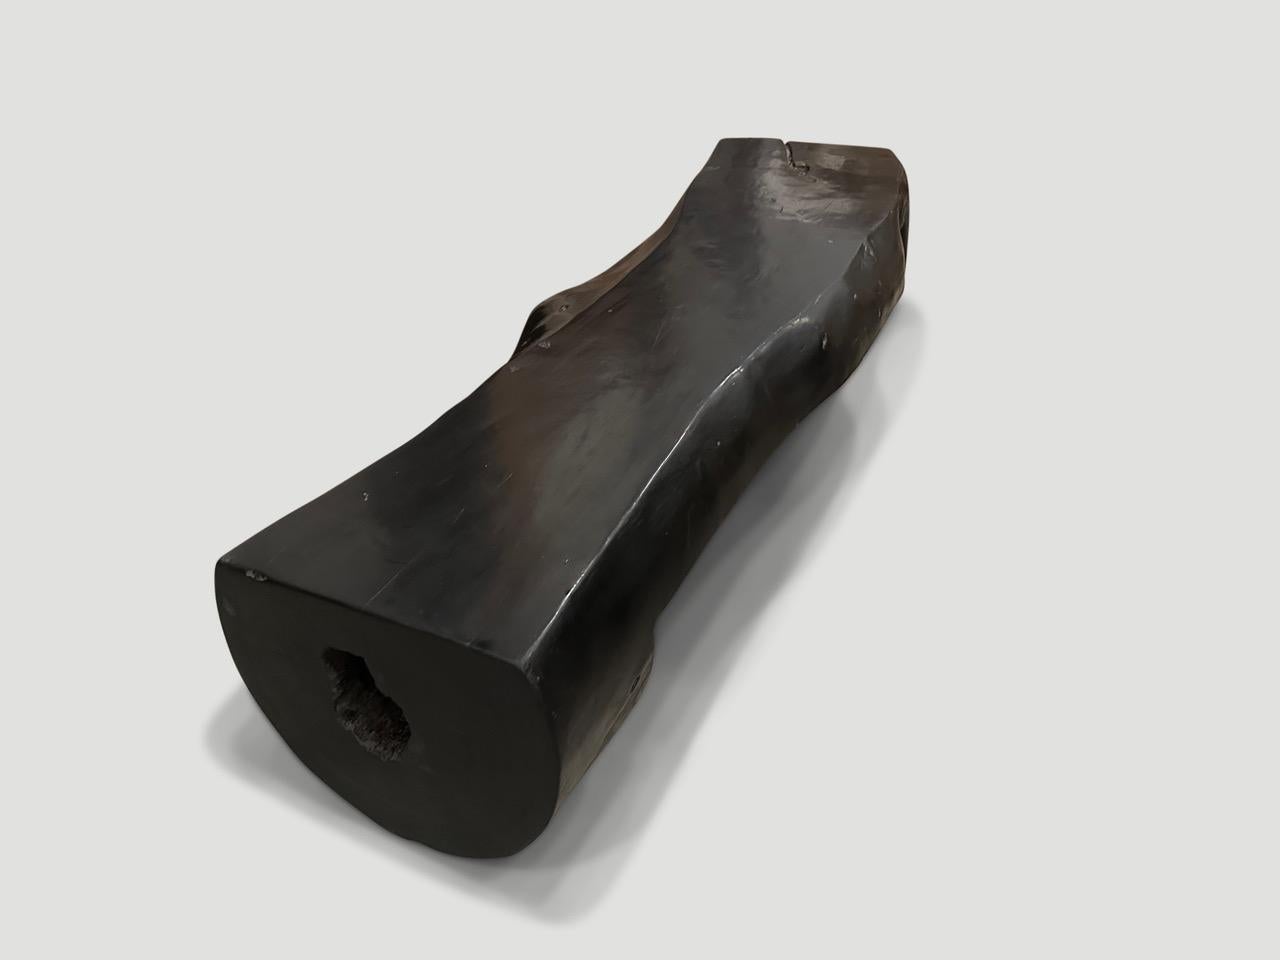 Sculptural log style wood bench. The live edge varies from 24” to 18” wide. Charred, sanded smooth and polished, whilst respecting the natural organic wood. Both functional and sculptural.

The Triple Burnt Collection represents a unique line of